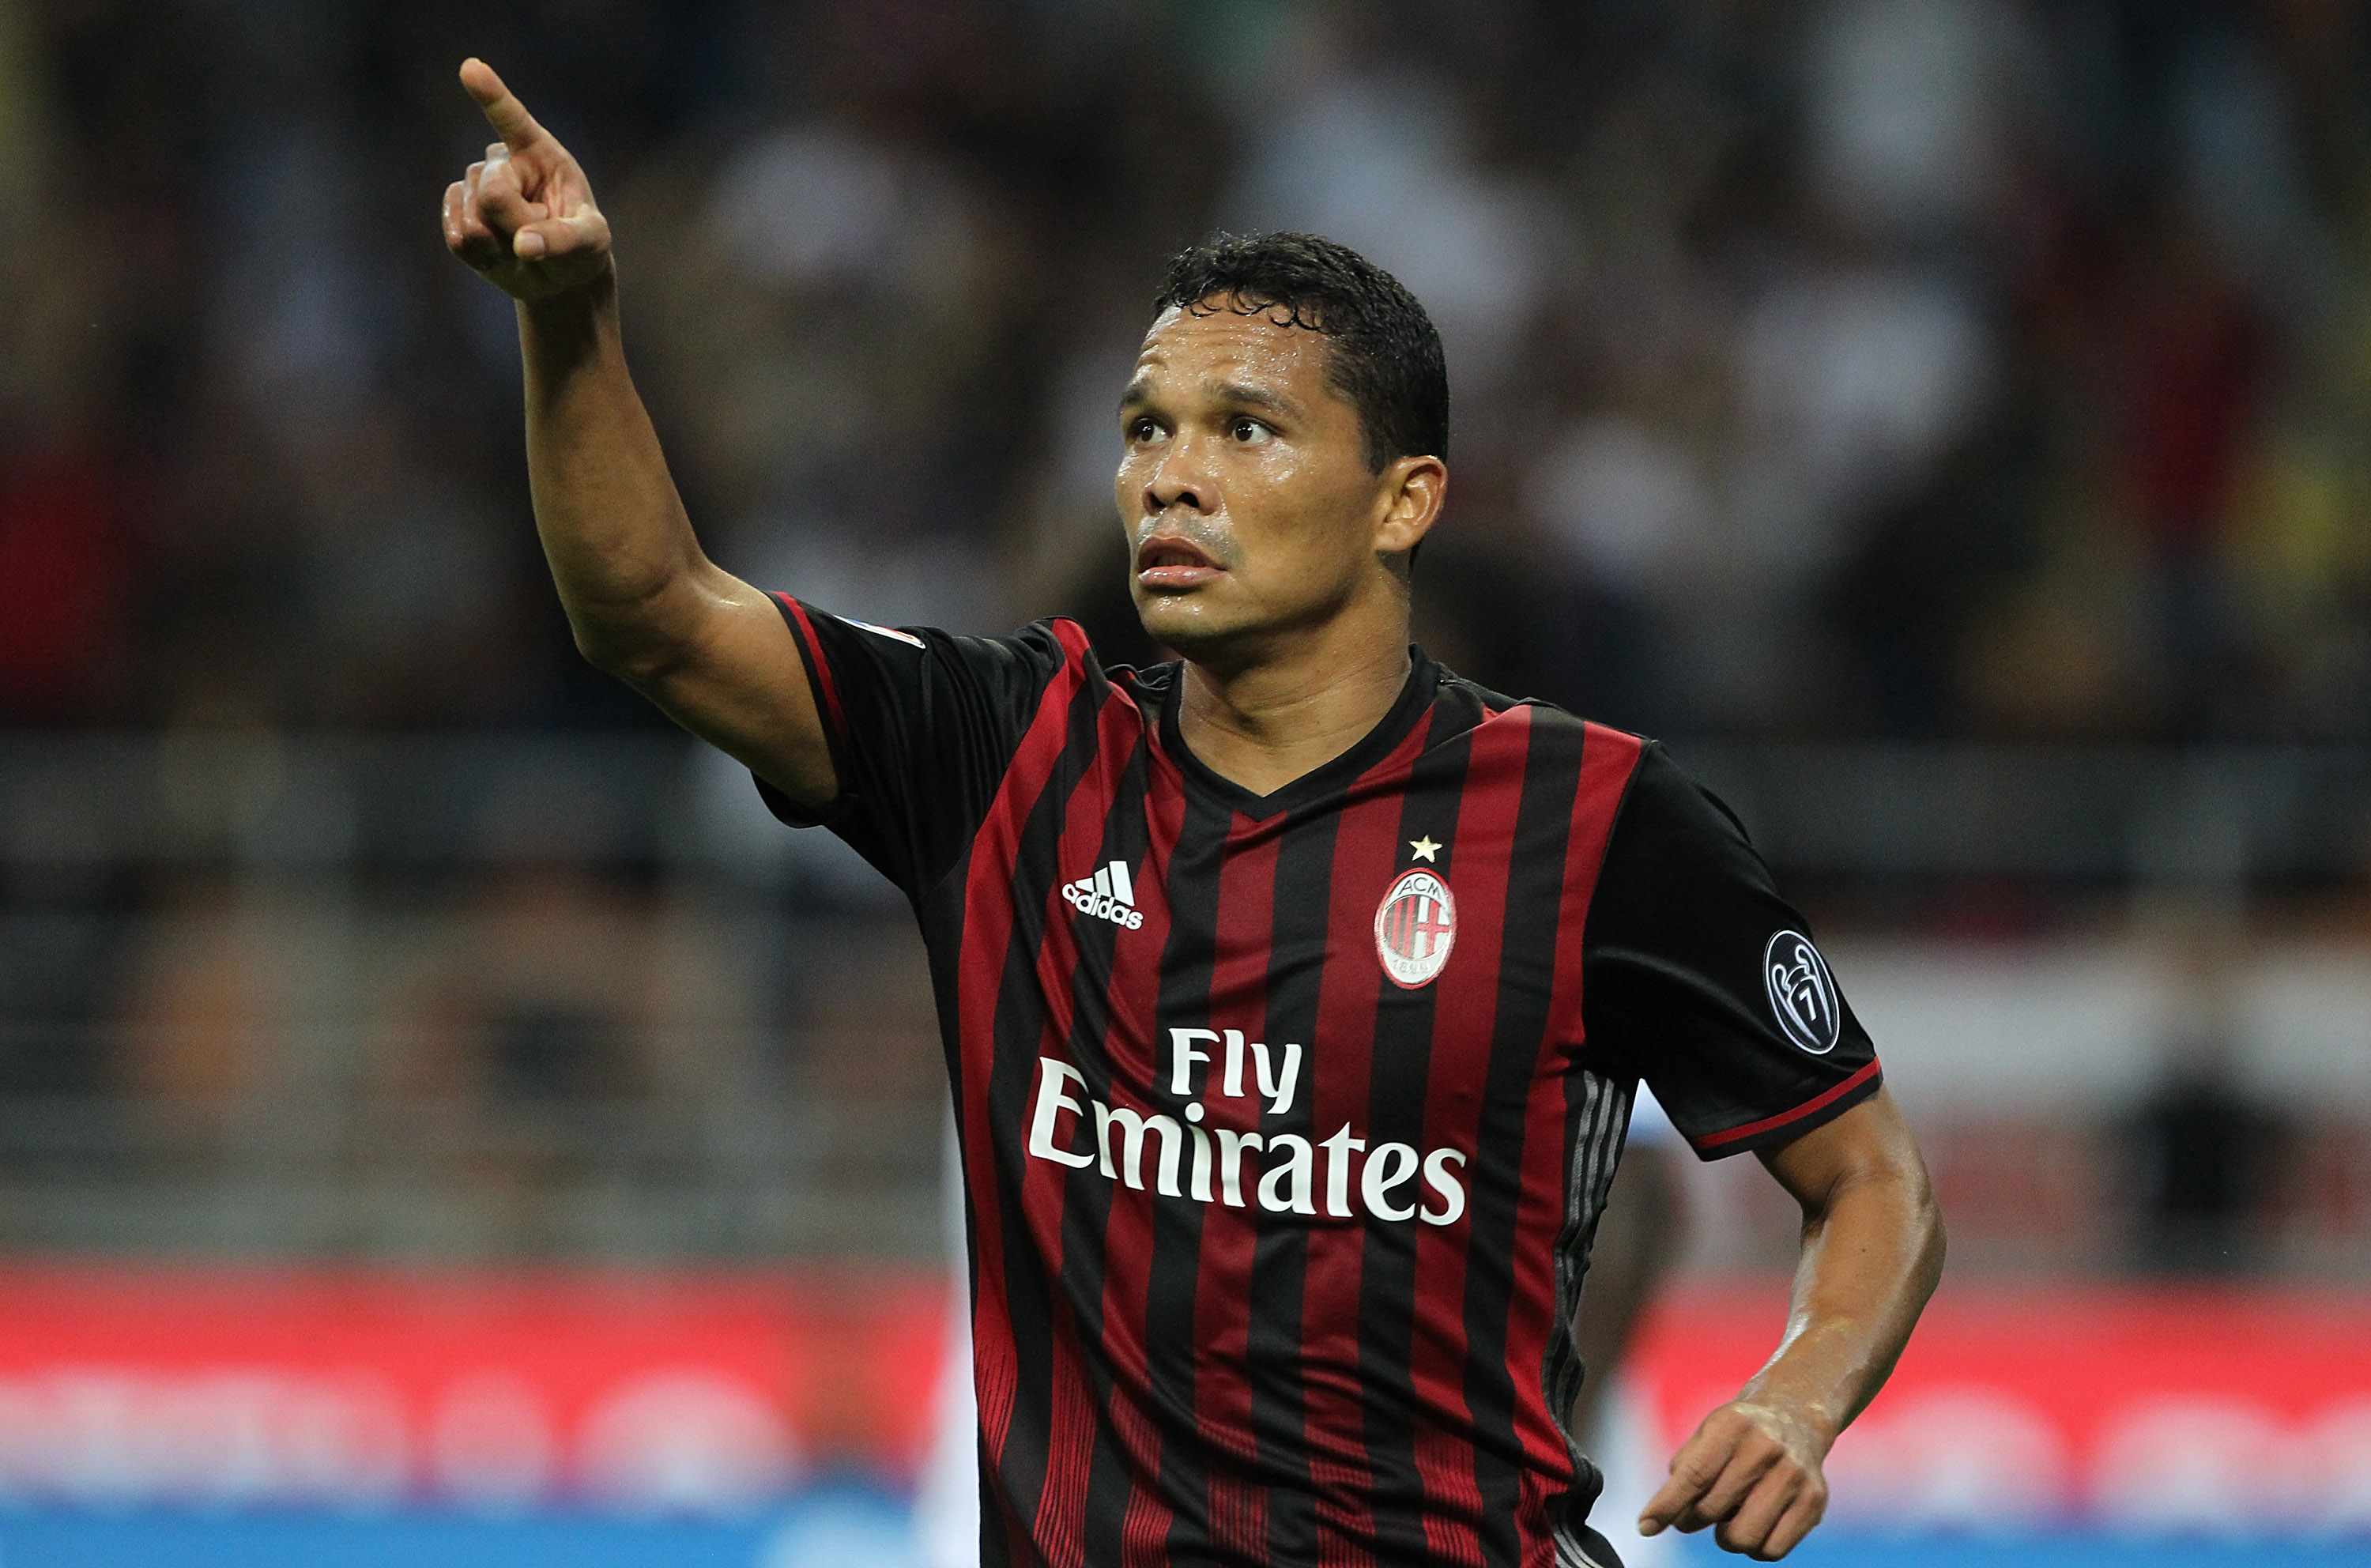 Bacca: “I want to stay in Spain, it would be for the best”